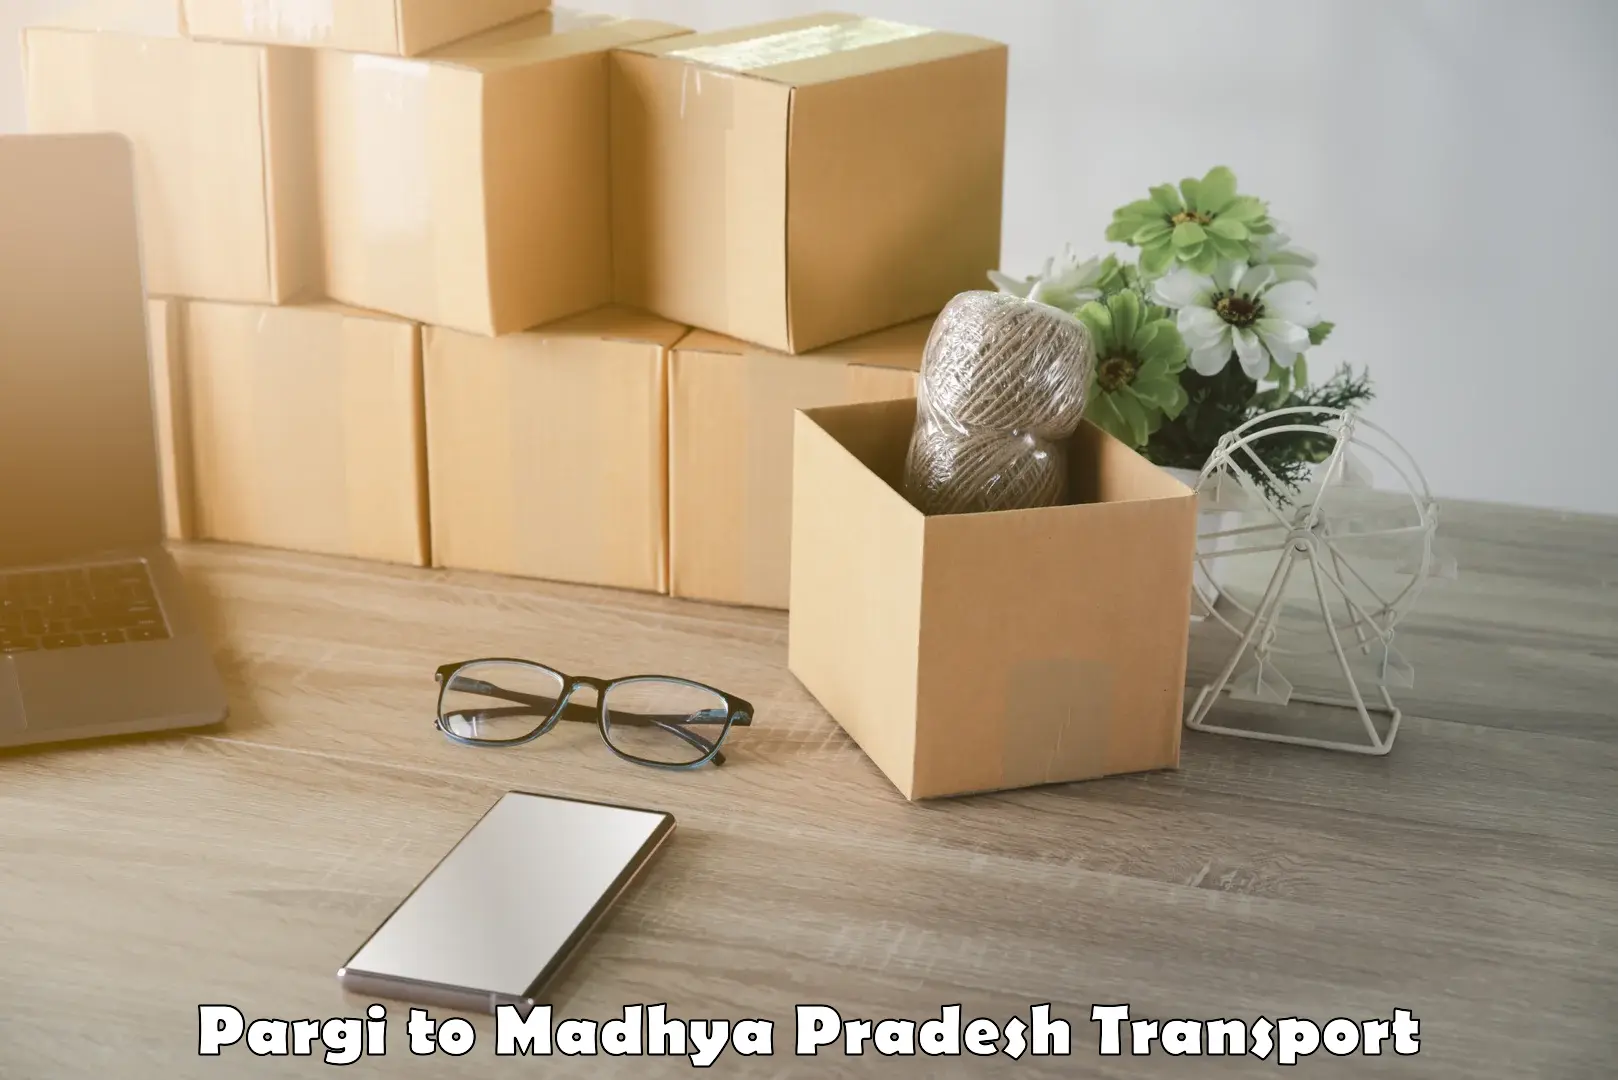 Package delivery services Pargi to Sidhi